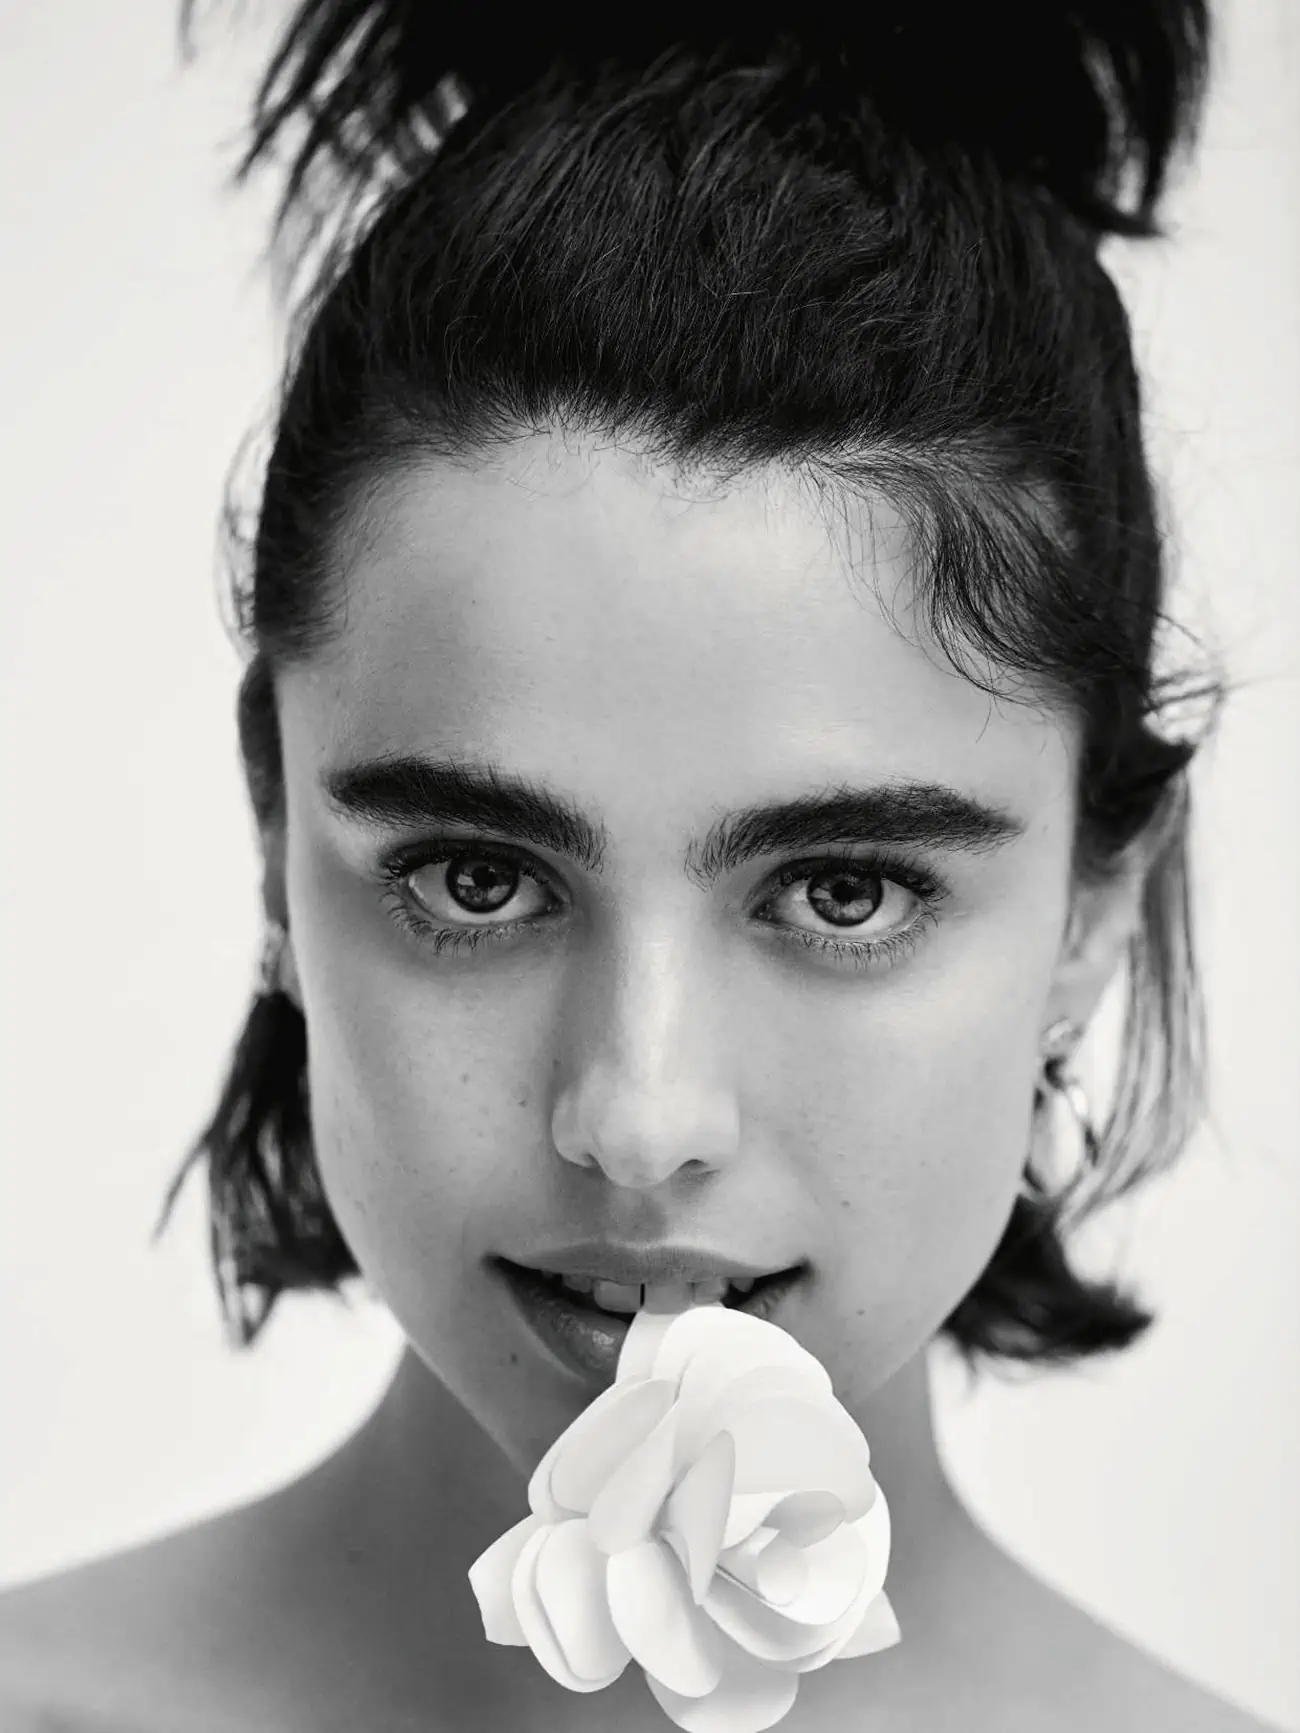 Margaret Qualley covers Elle Italia October 12th, 2023 by Cass Bird